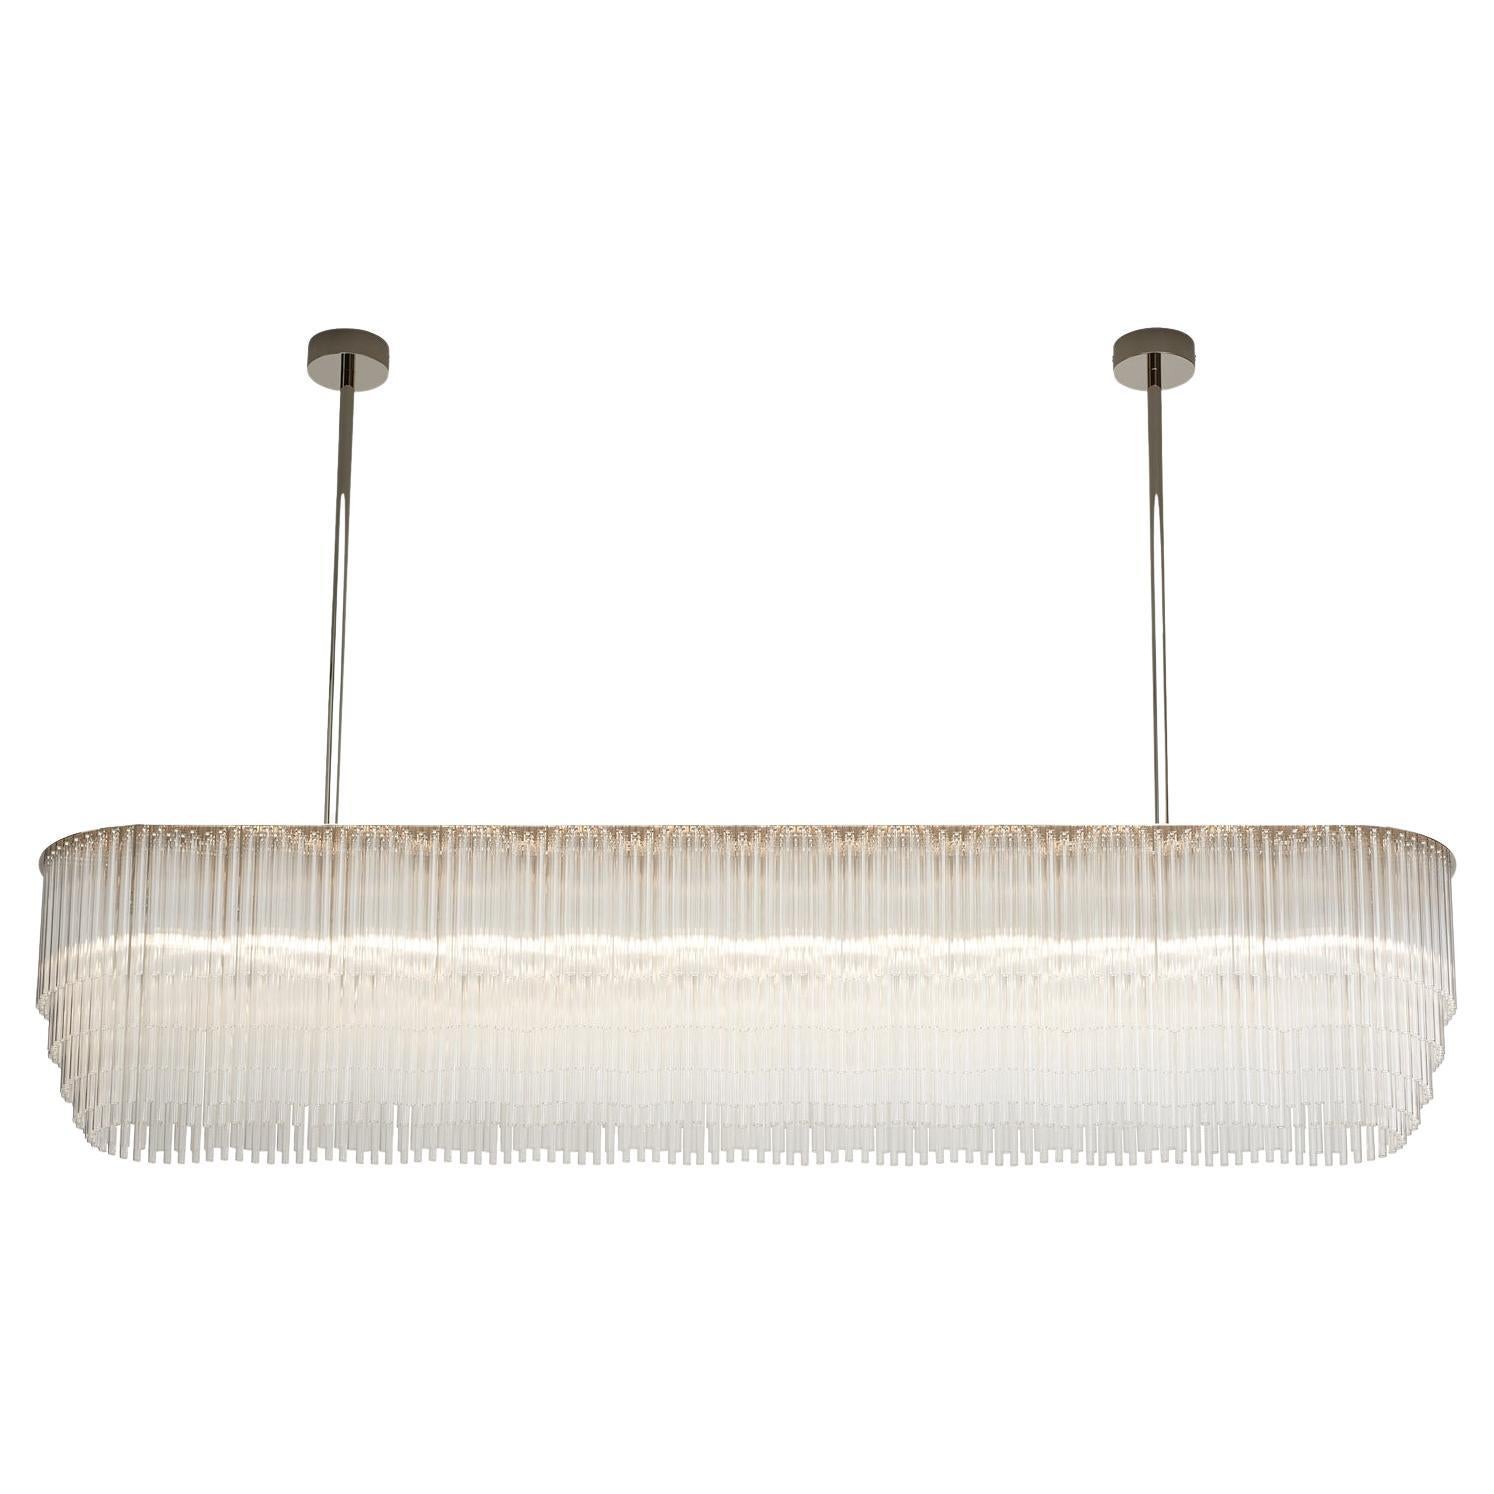 Linear Chandelier 1915mm / 75.25" in Polished Chrome with Tiered Glass Profile